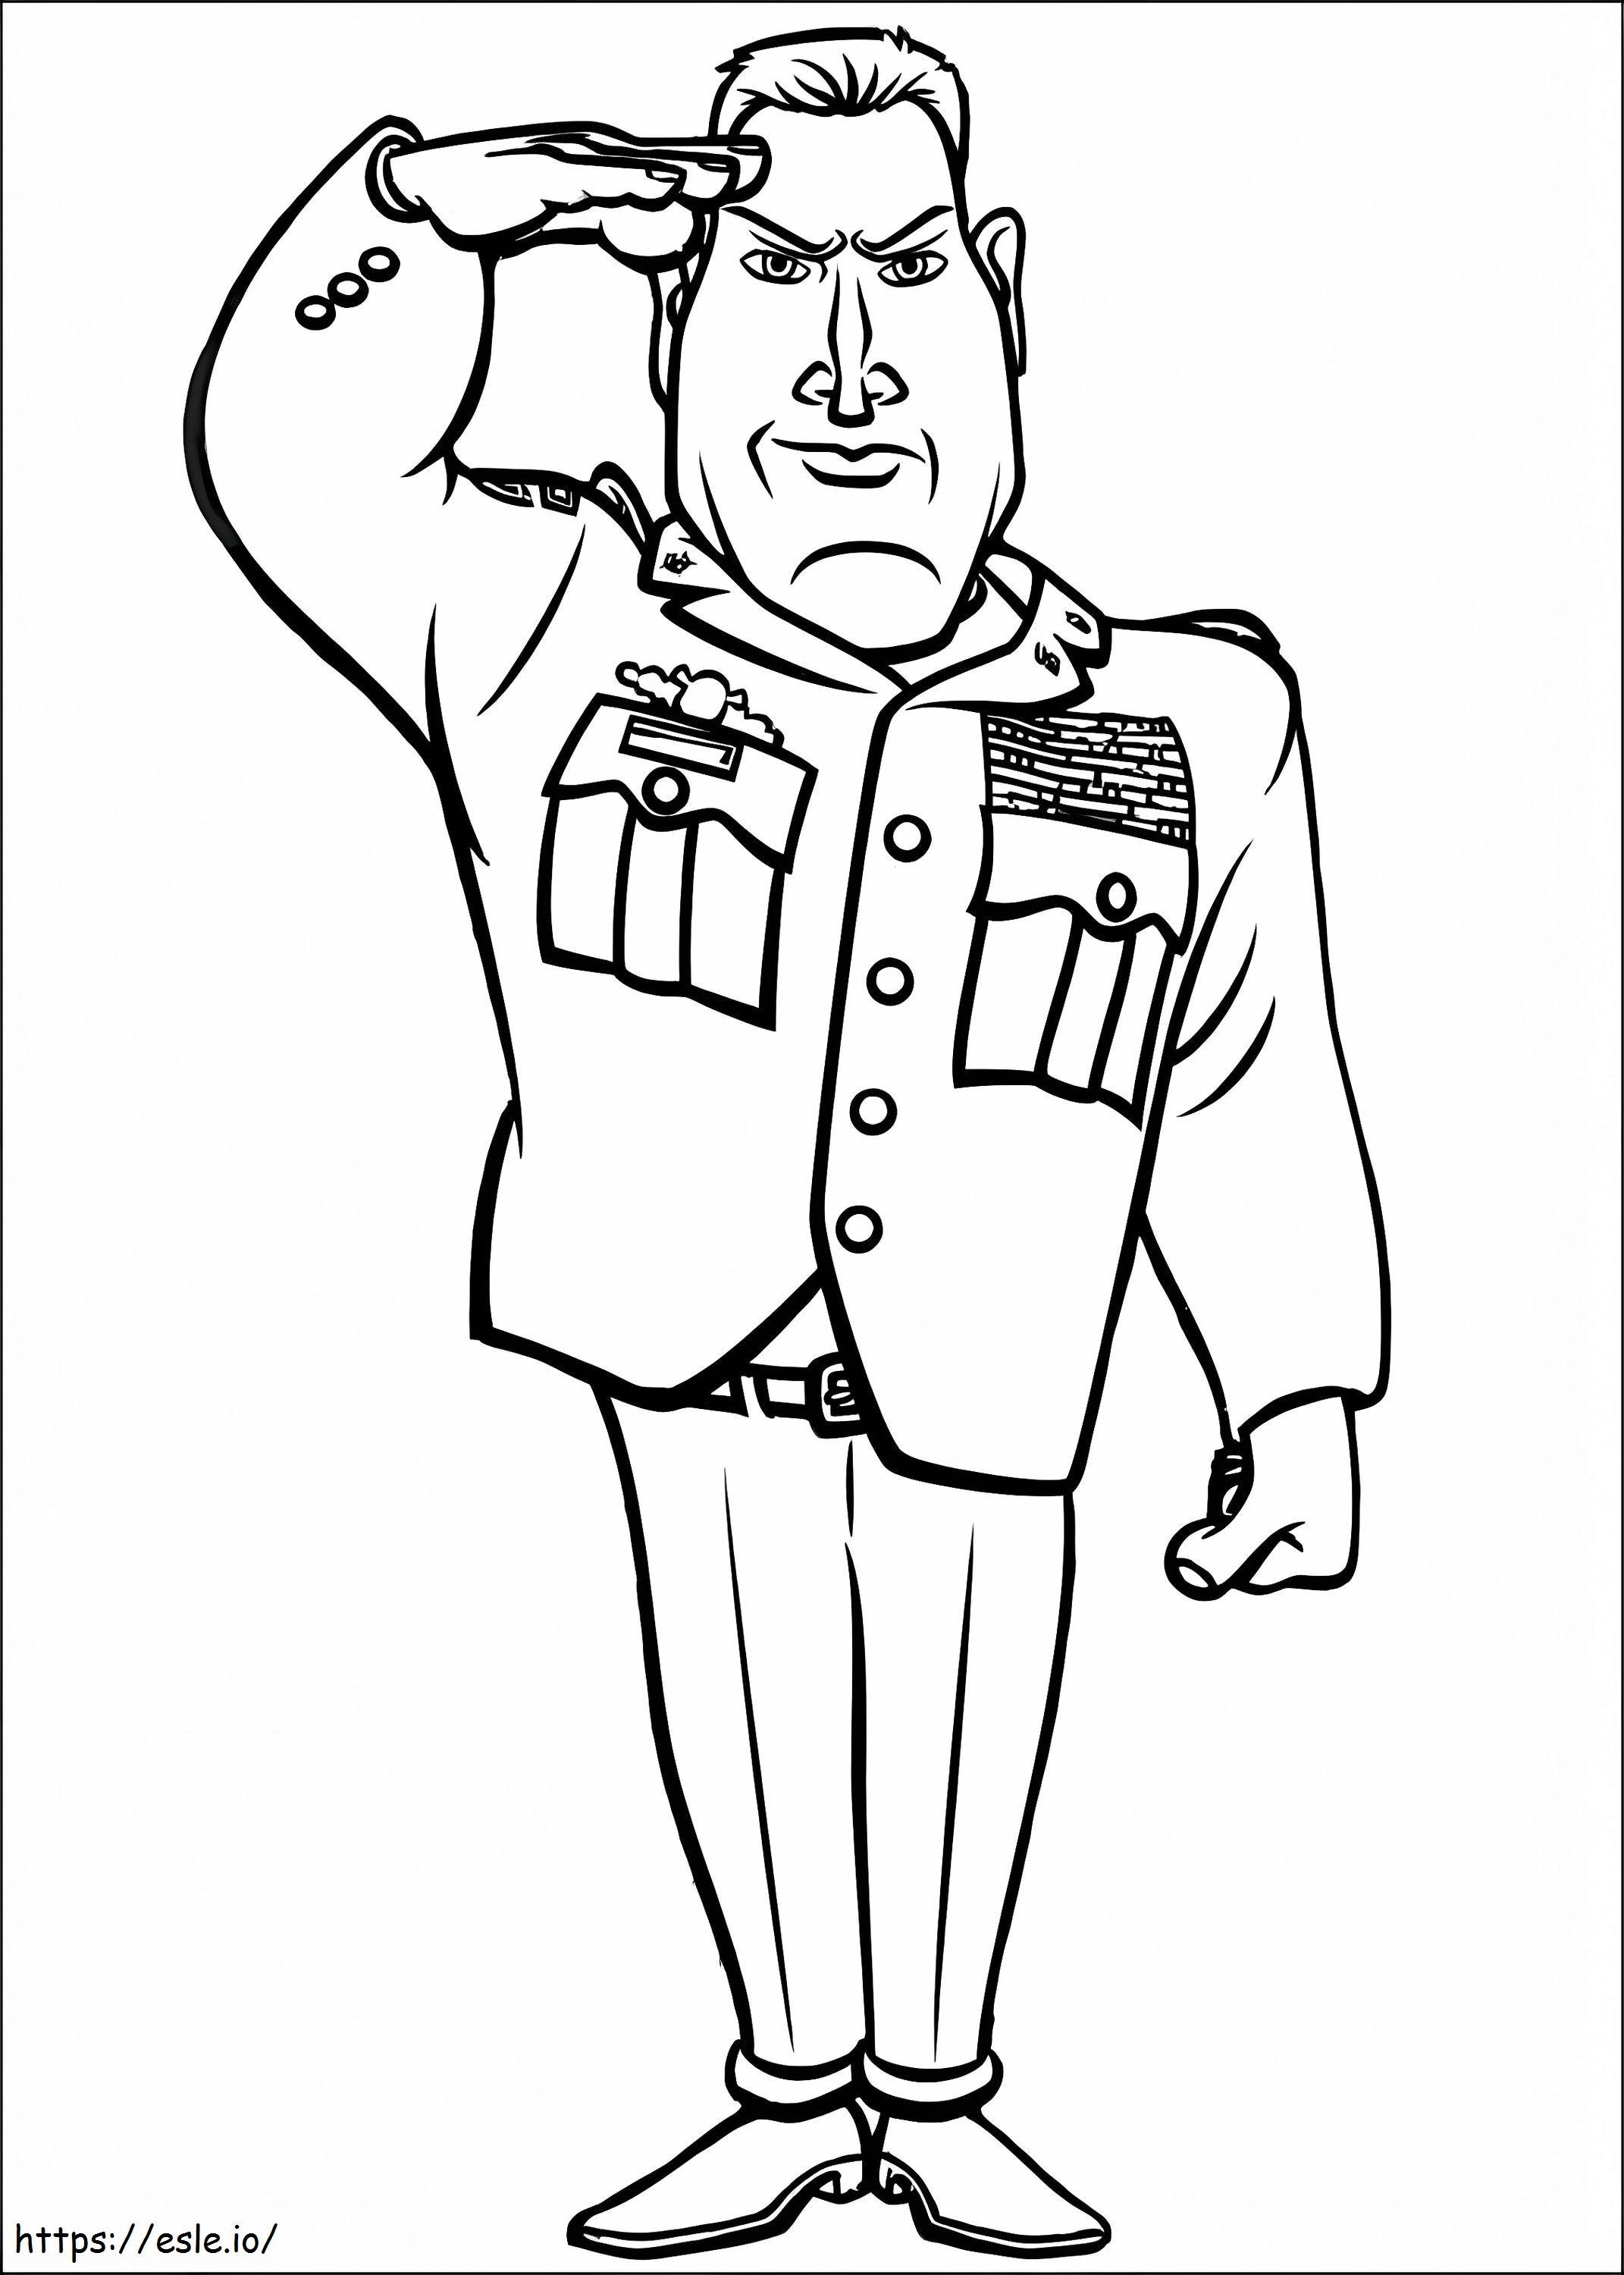 General Monger From Monsters Vs Aliens coloring page